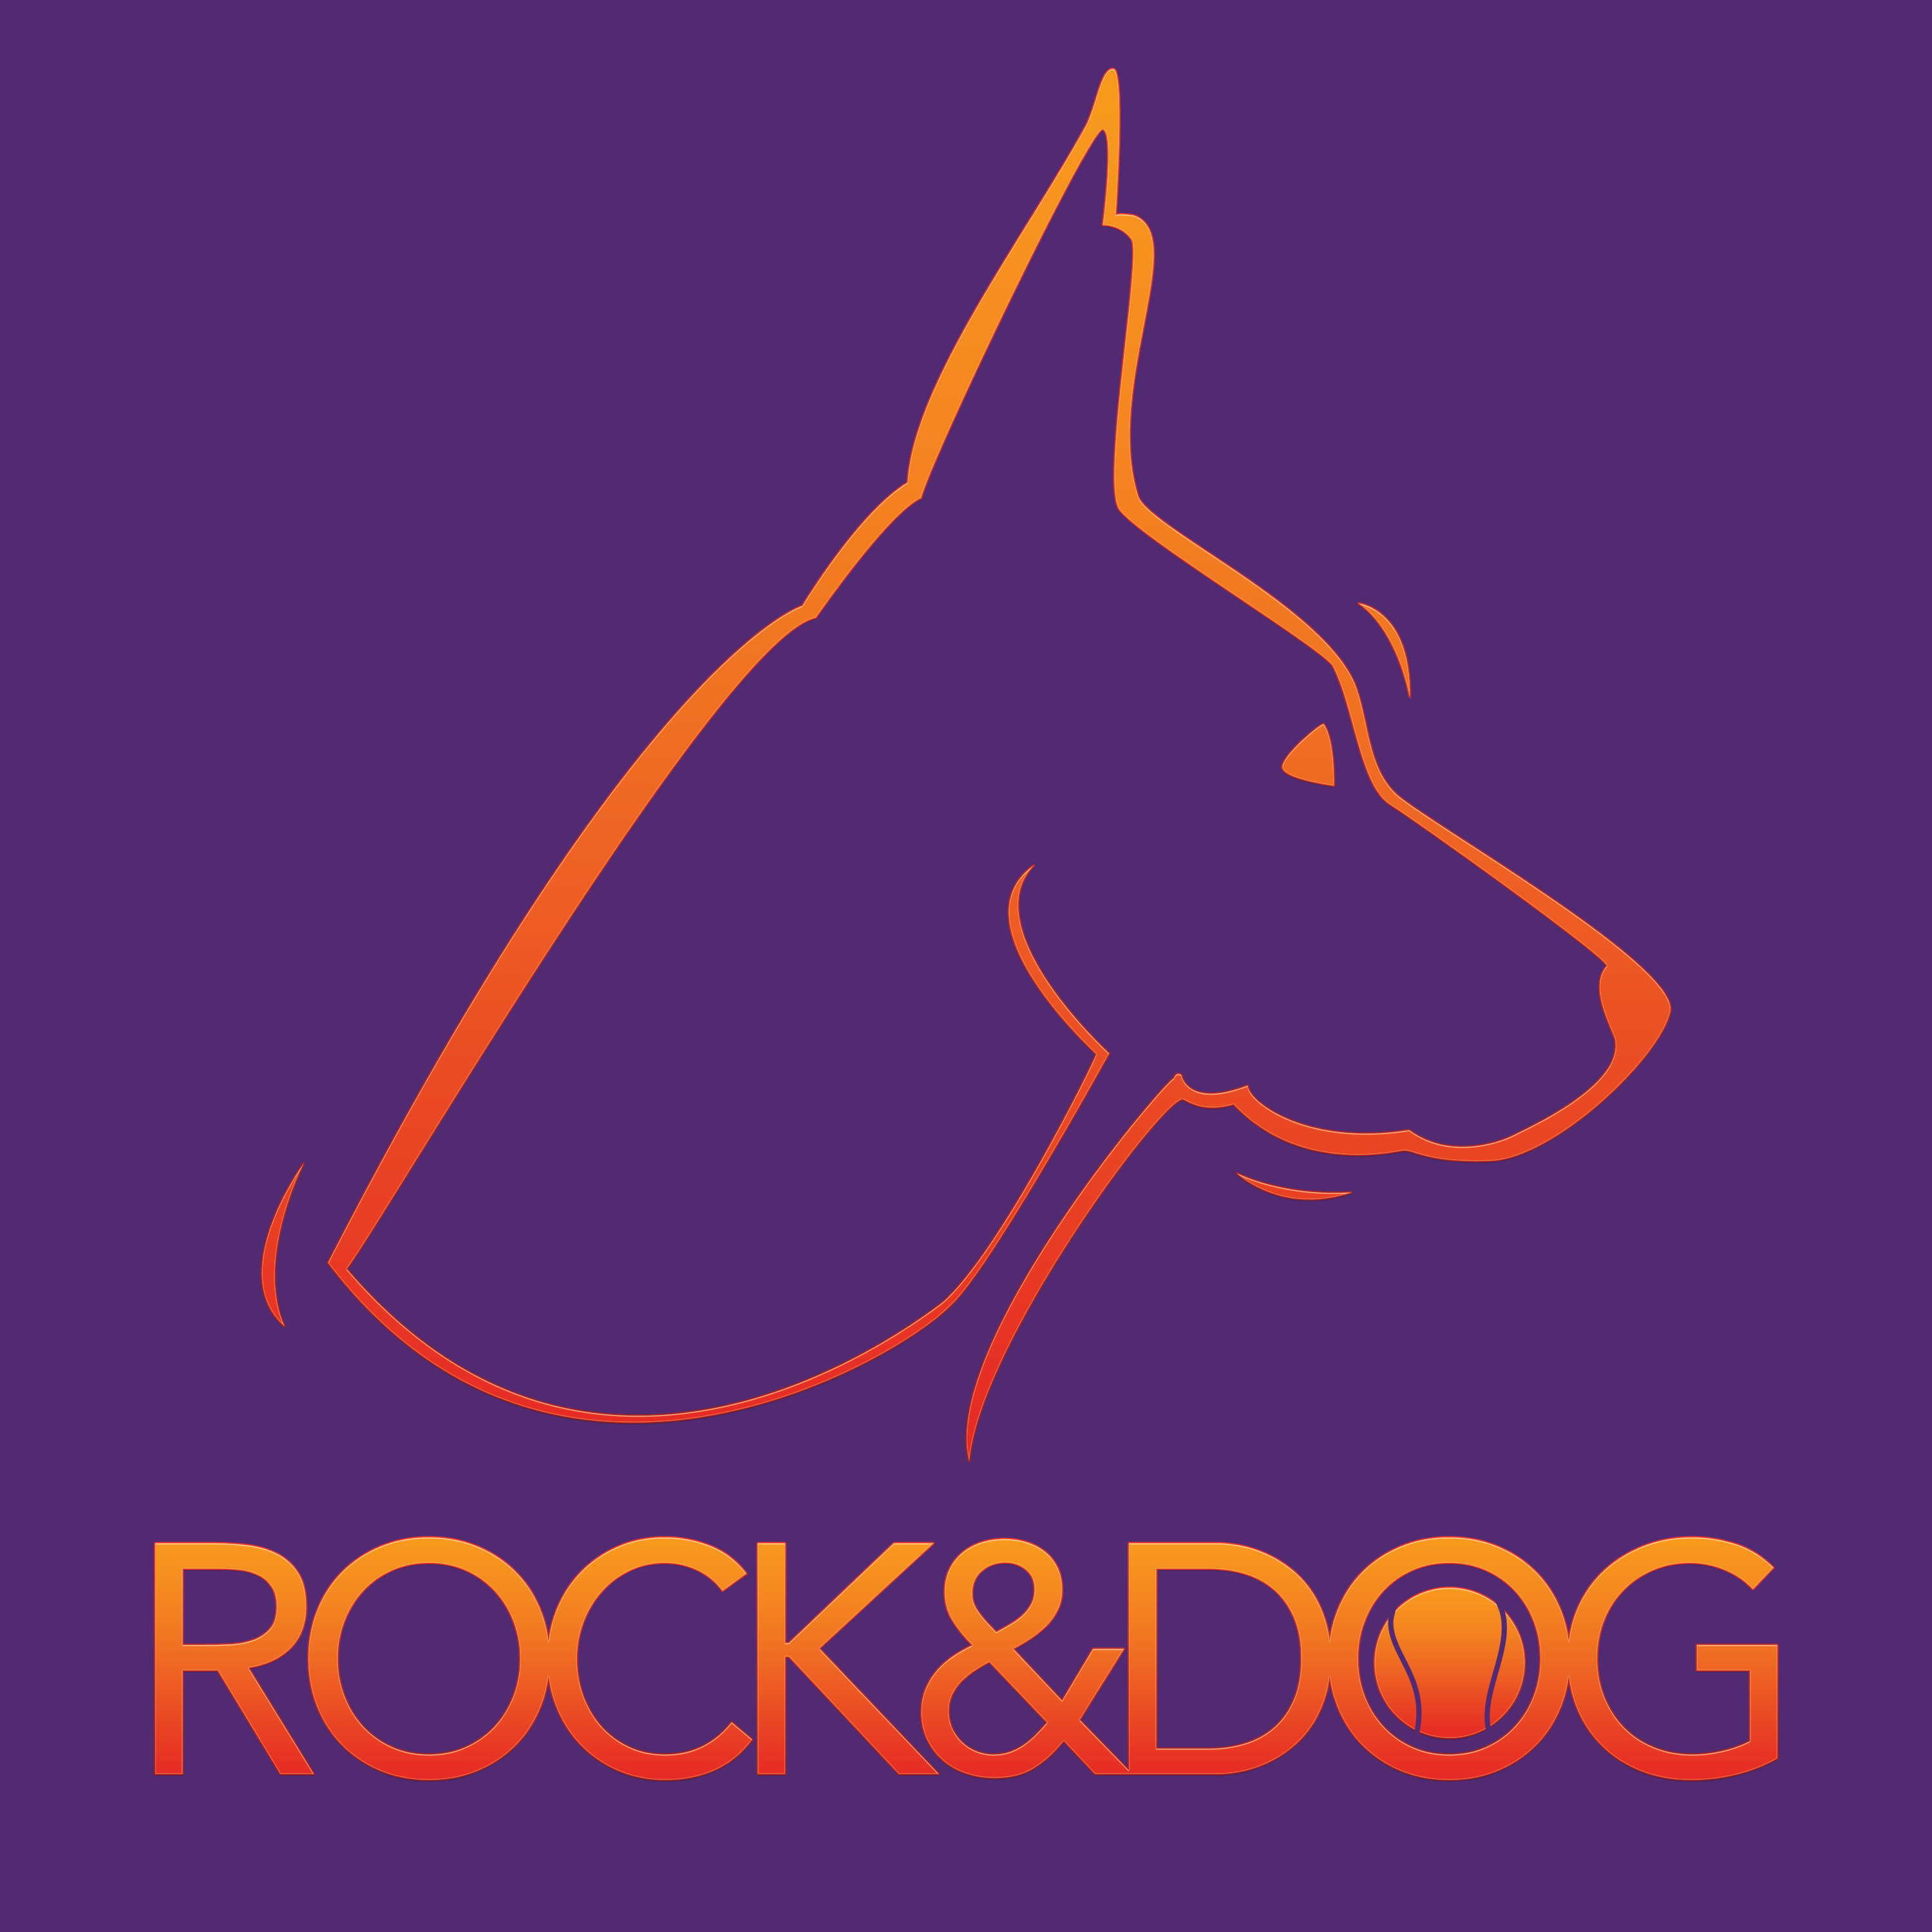  Rock and Dog 